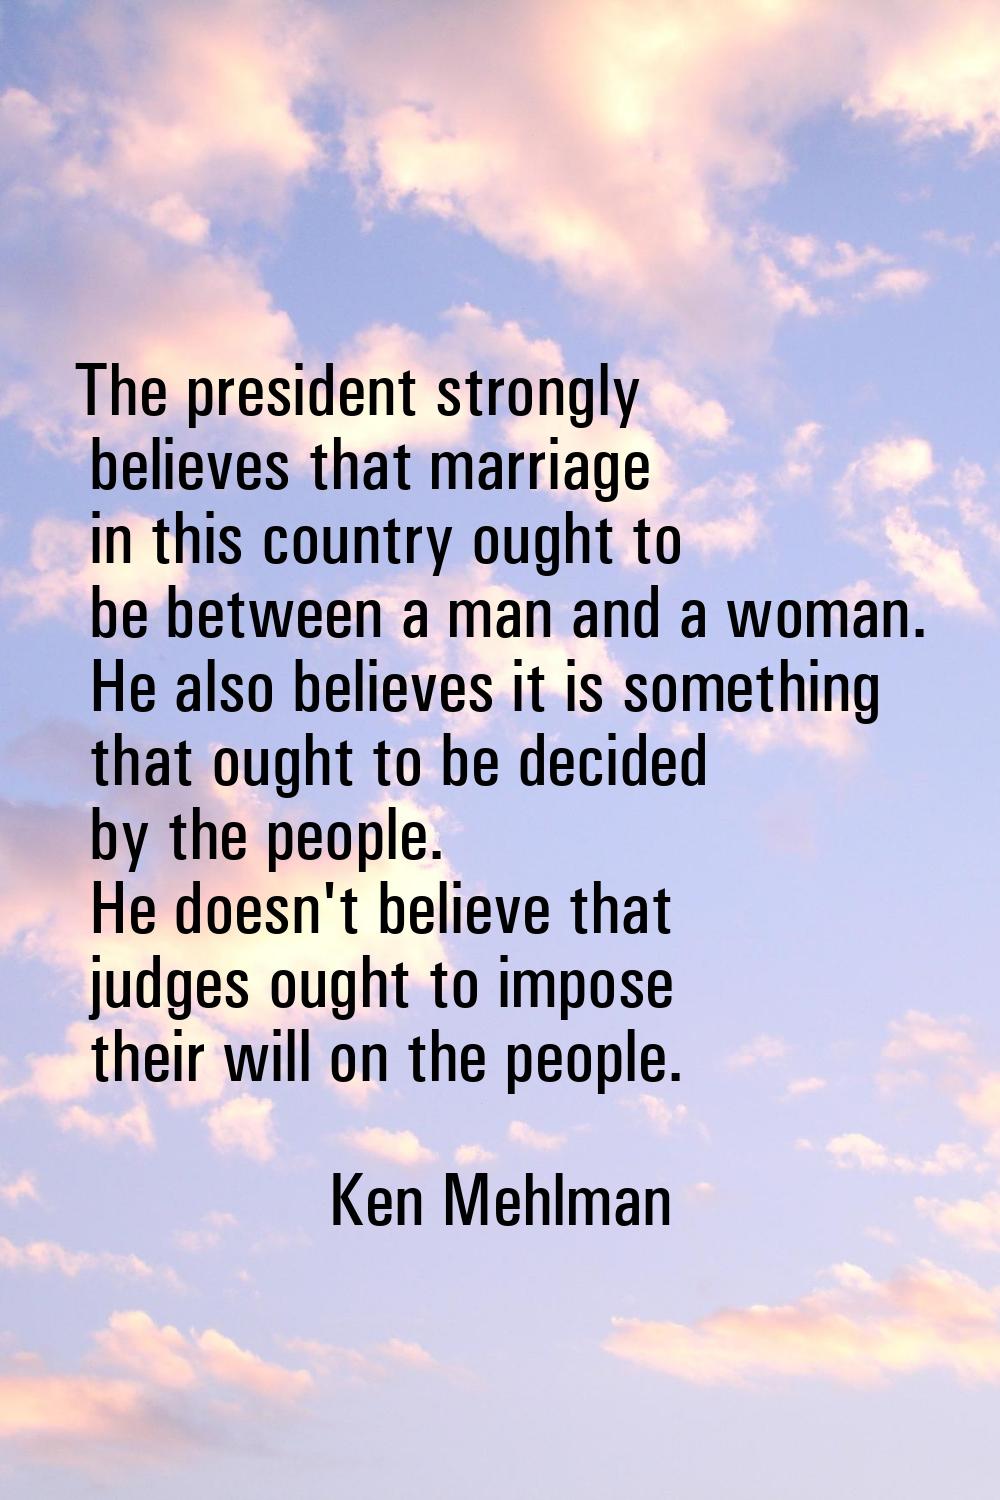 The president strongly believes that marriage in this country ought to be between a man and a woman